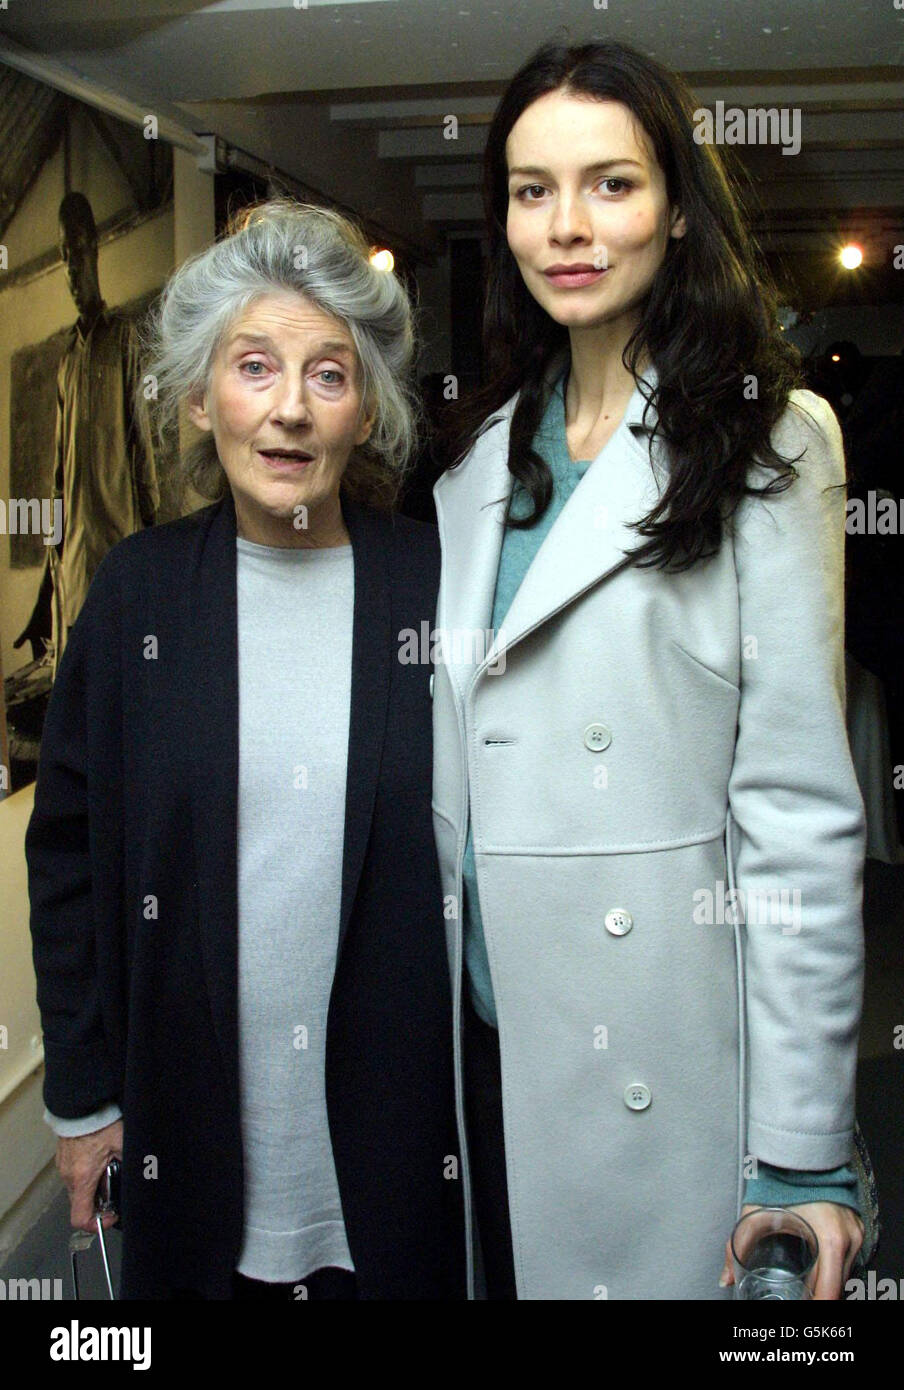 Actress Saffron Burrows with Emma Thompson's mother Phyllida Law, during the 'Broken Landscape' private view at the OXO Tower in London. The exhibition of photographs from photojournalist Gideon Mendel depict the plight of Africa and the AIDS crisis. Stock Photo